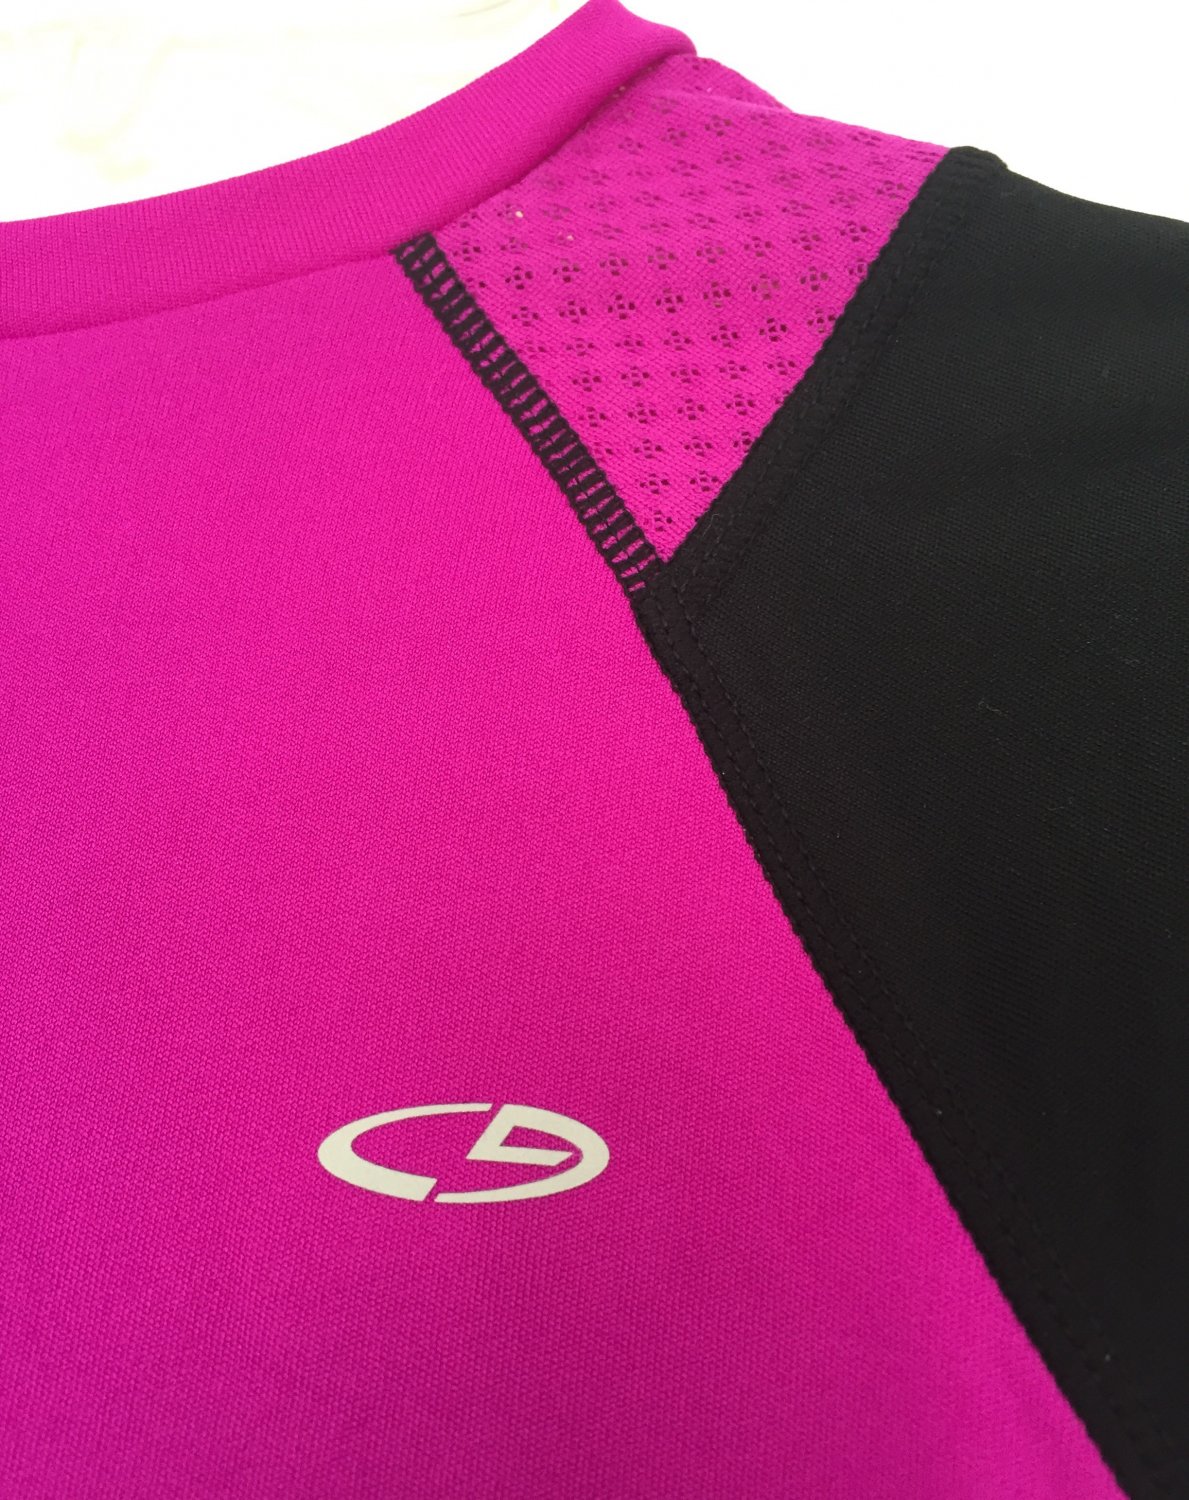 C9 by Champion Duo Dry Purple Black Workout Active Long Sleeve Top ...